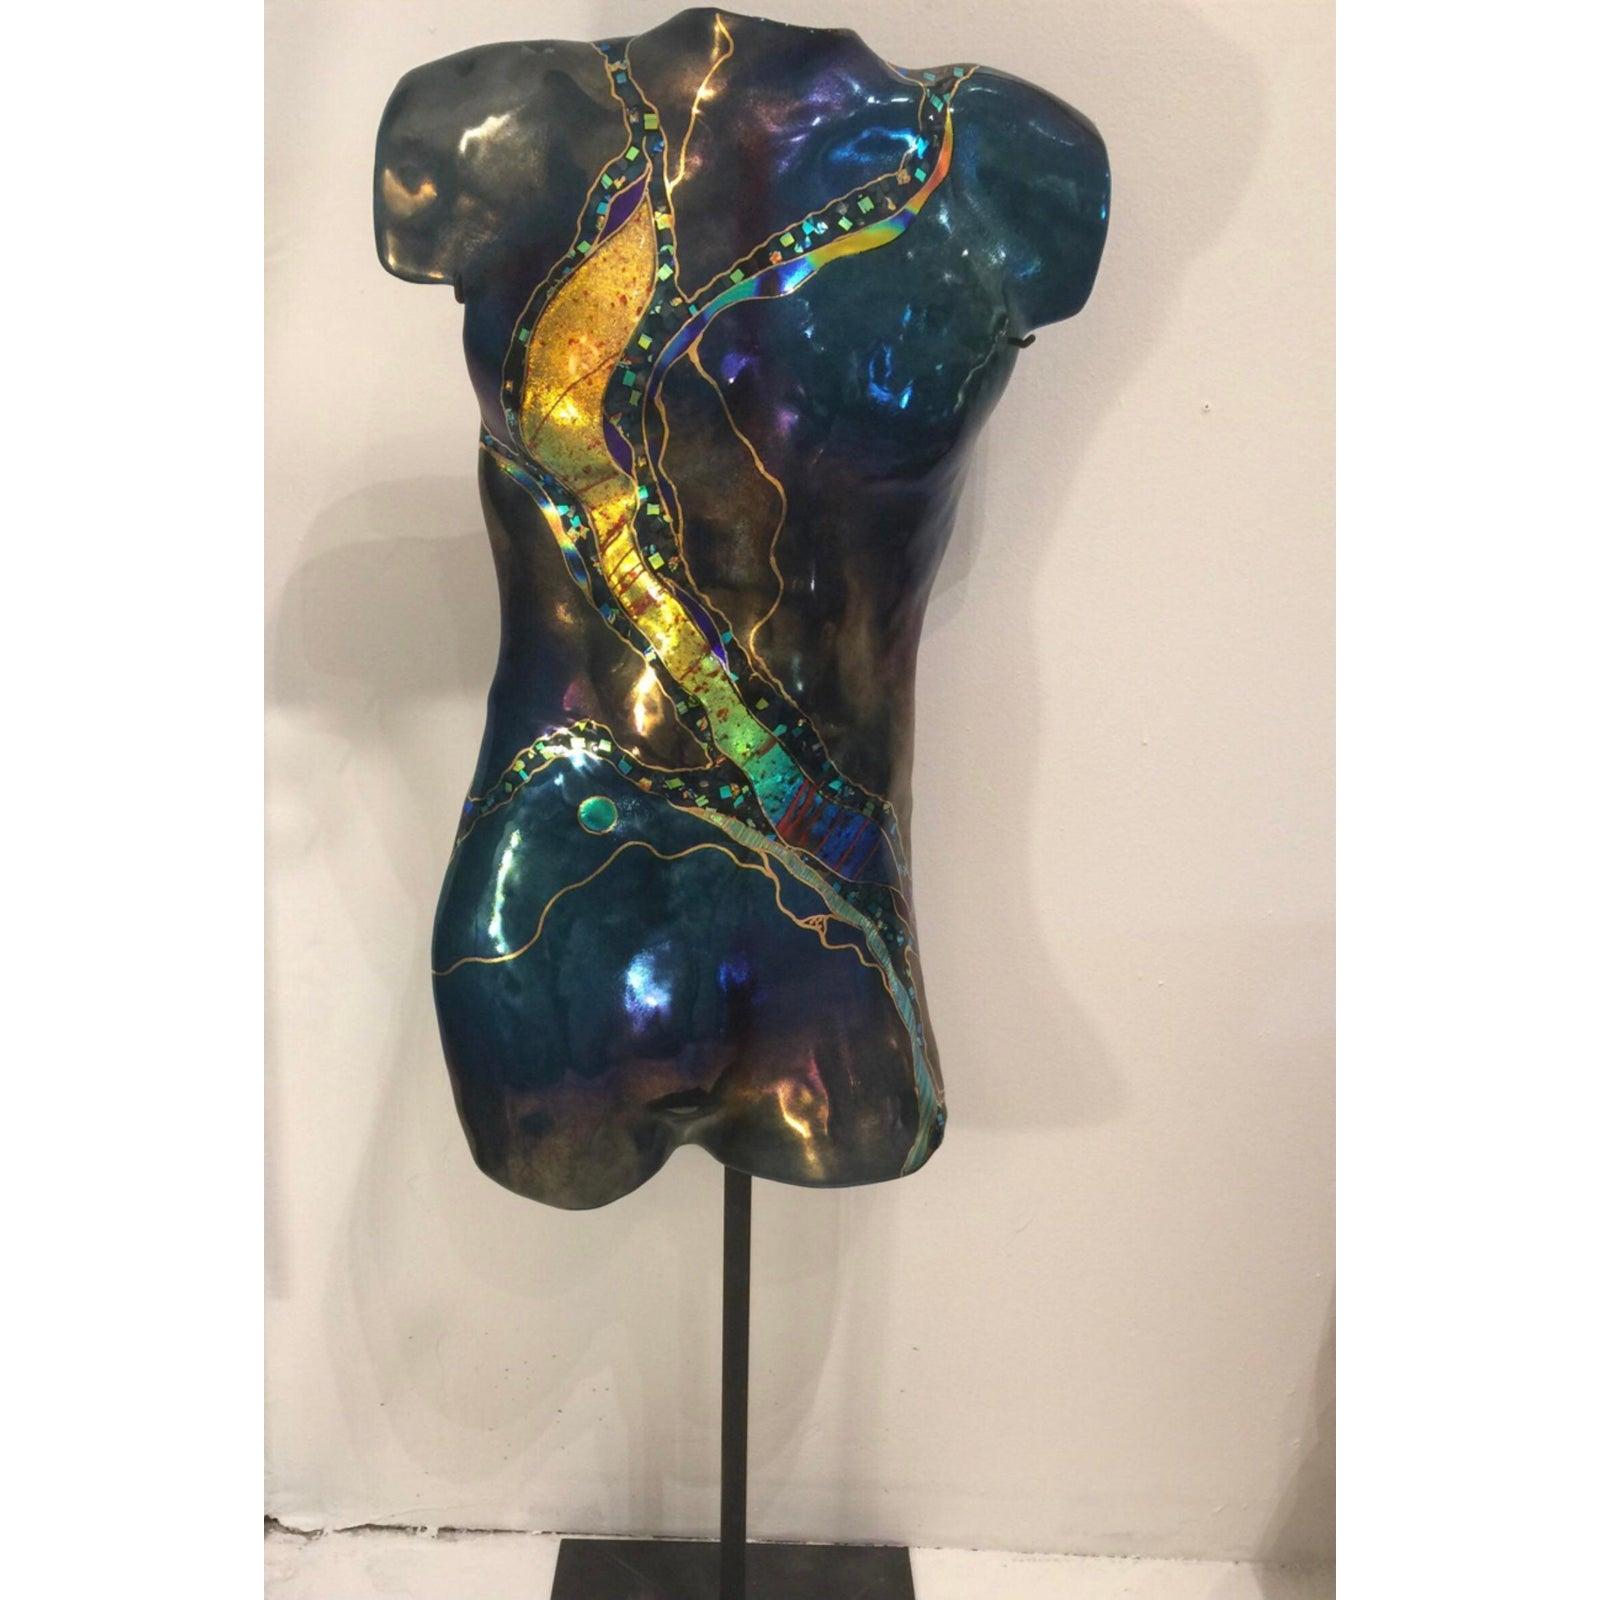 Contemporary Modernist Fusion Glass Torso Sculpture Signed by Karen Ehart Half Moon
With an organic, painterly style, Karen Ehart draws her inspiration from nature: sea life, microscopic images, a rock-filled stream bed. The many places she has